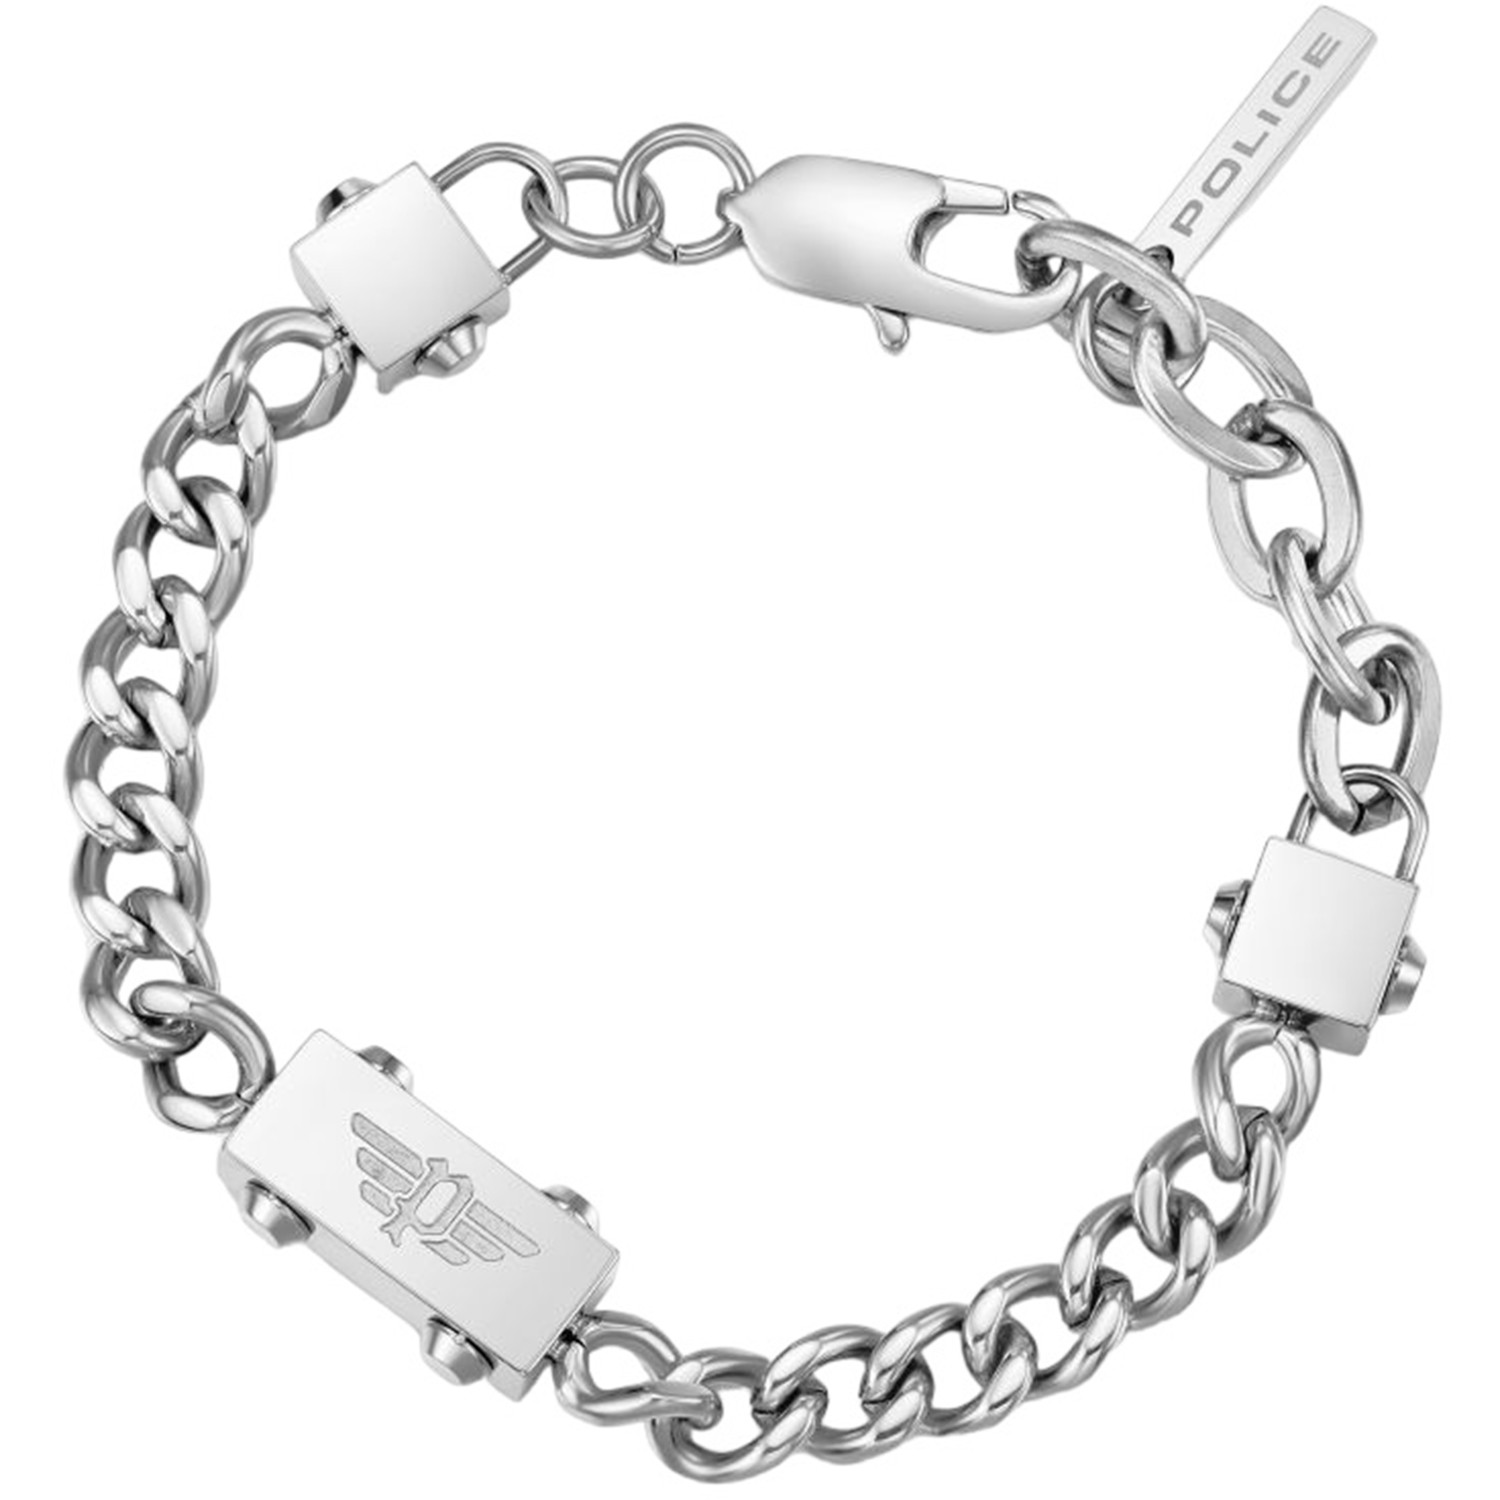 Police Men\'s Clicktime.eu» PEAGB0002102 Steel Comprar CHAINED Bracelets Police PEAGB0002102 Silver CHAINED Stainless Silver Police Bracelets Barato | Stainless Bracelets Men\'s Bracelets PEAGB0002102 Men\'s online | Comprar Steel